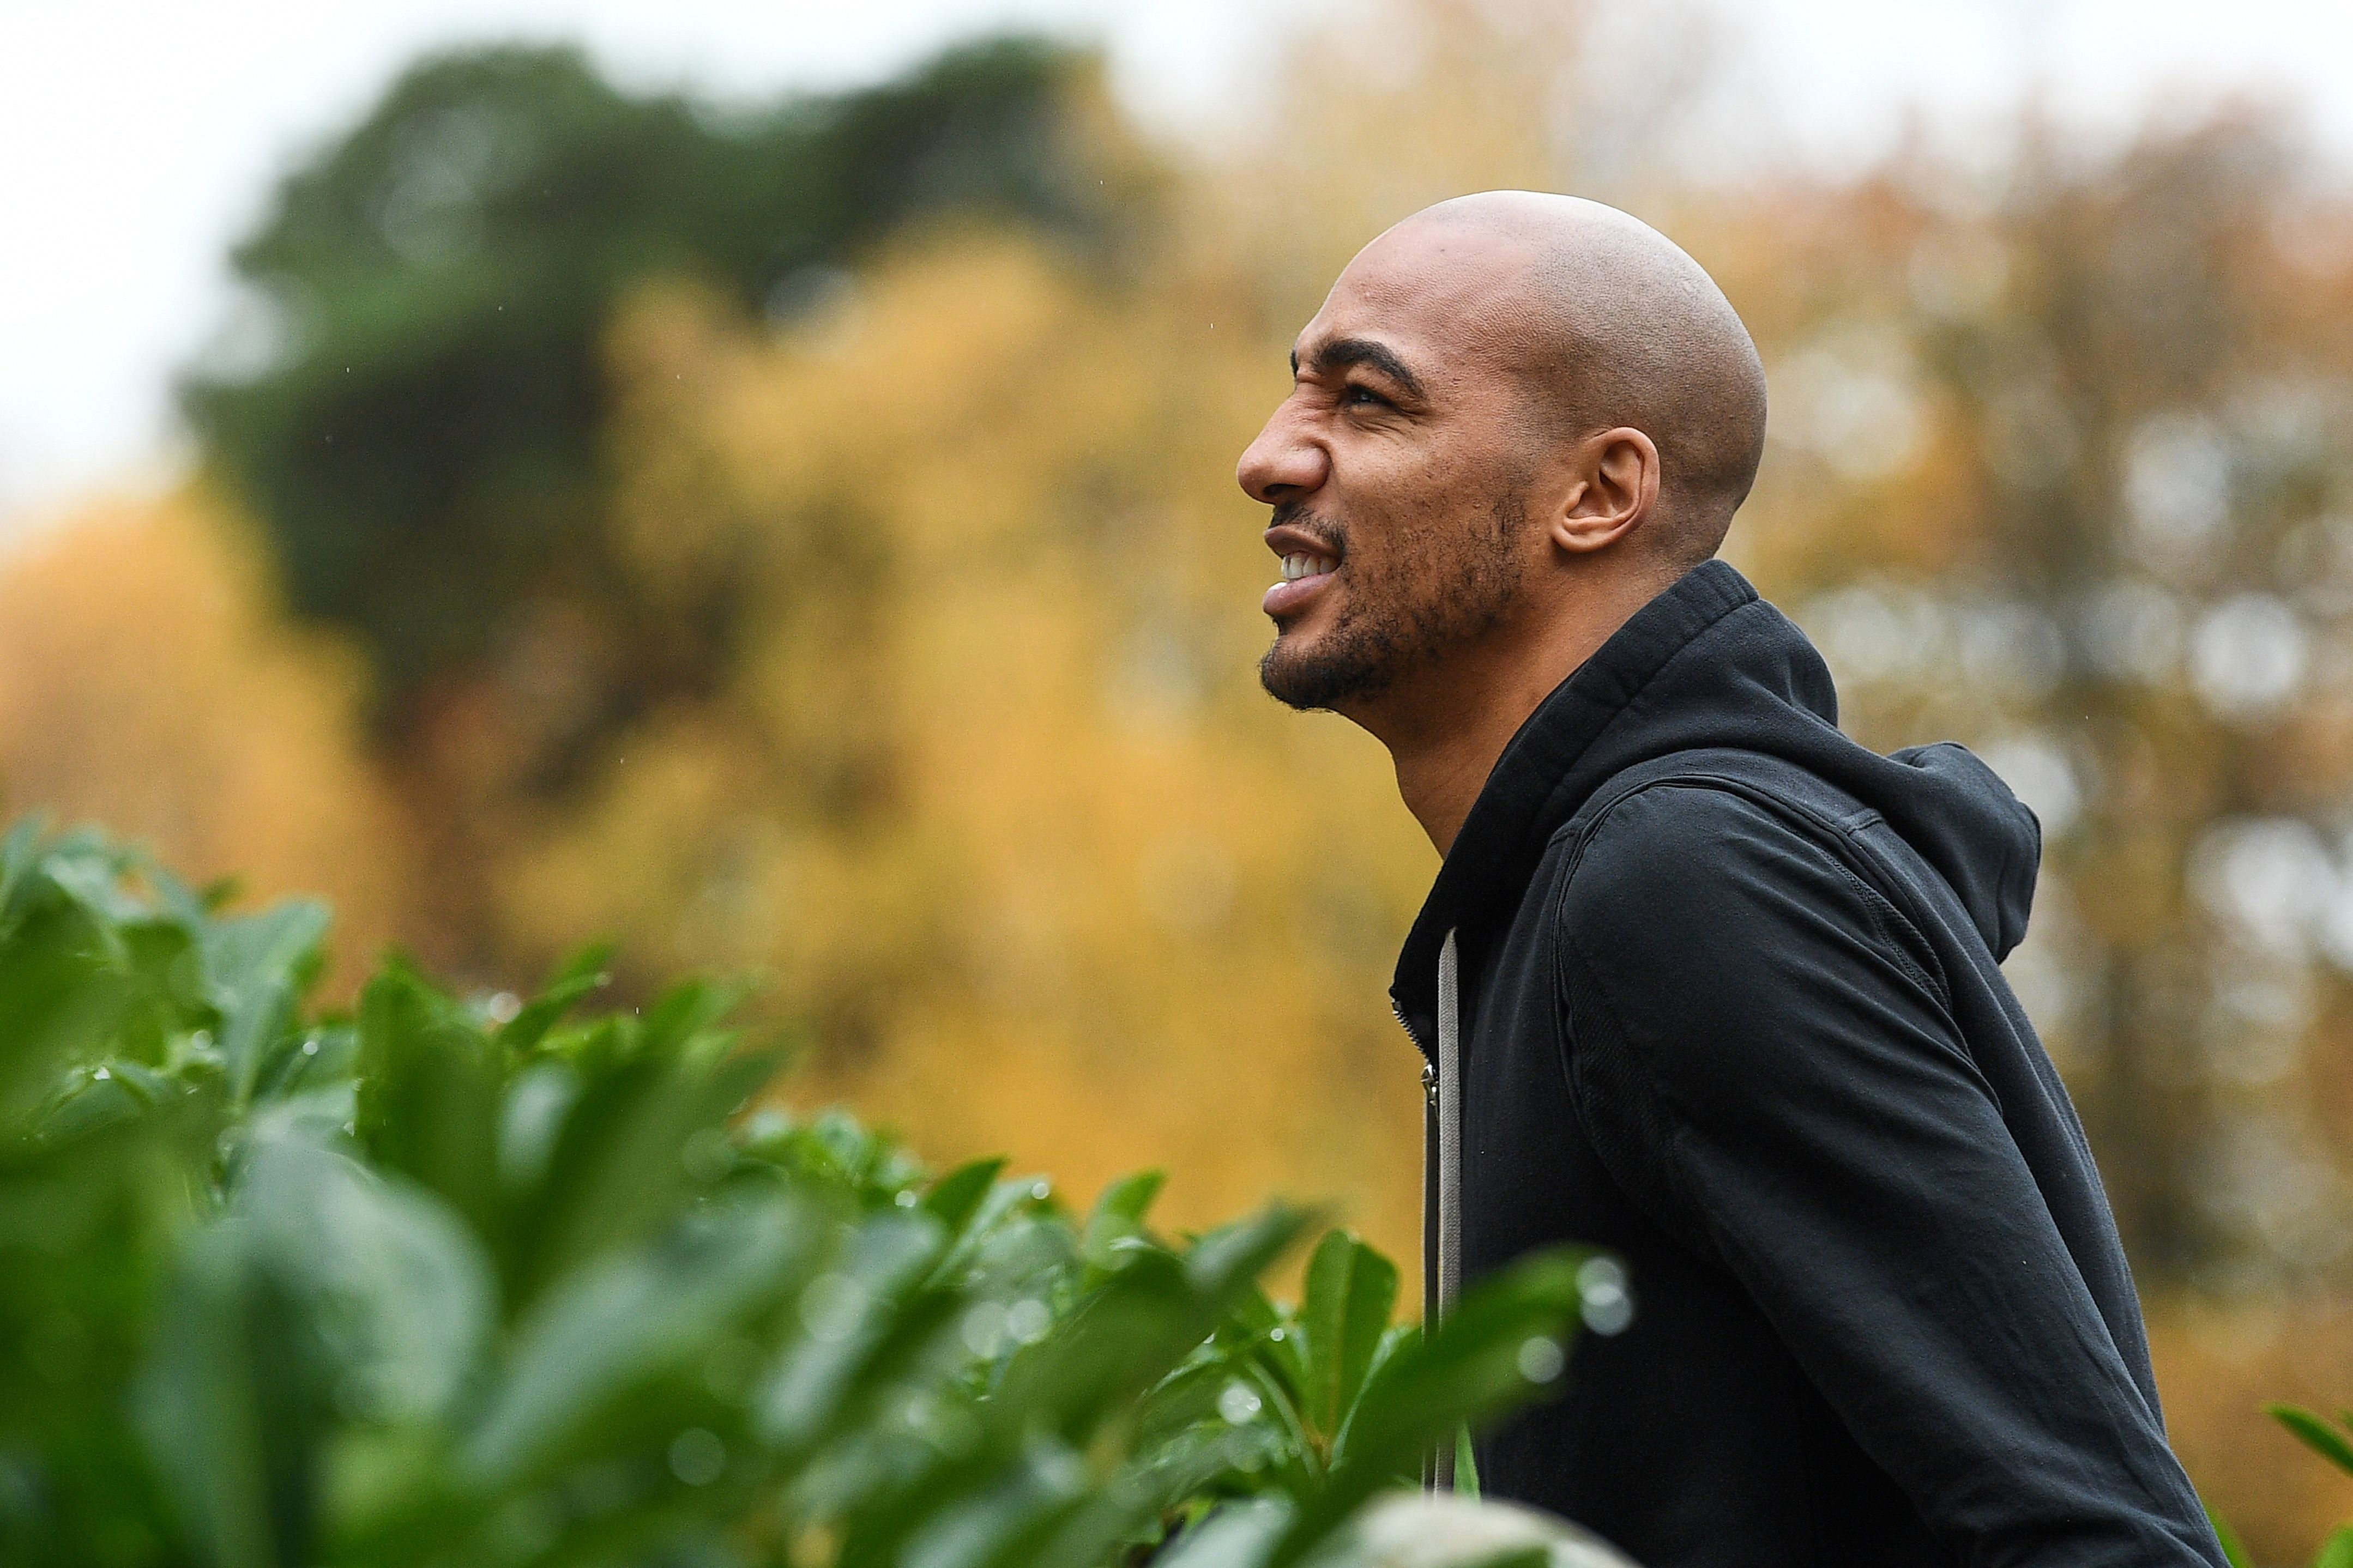 France's midfielder Steven N'zonzi arrives in Clairefontaine-en-Yvelines on November 12, 2018, as part of the team's preparation for the upcoming Nations League football match against the Netherlands and a friendly football match against Uruguay. (Photo by FRANCK FIFE / AFP)        (Photo credit should read FRANCK FIFE/AFP/Getty Images)